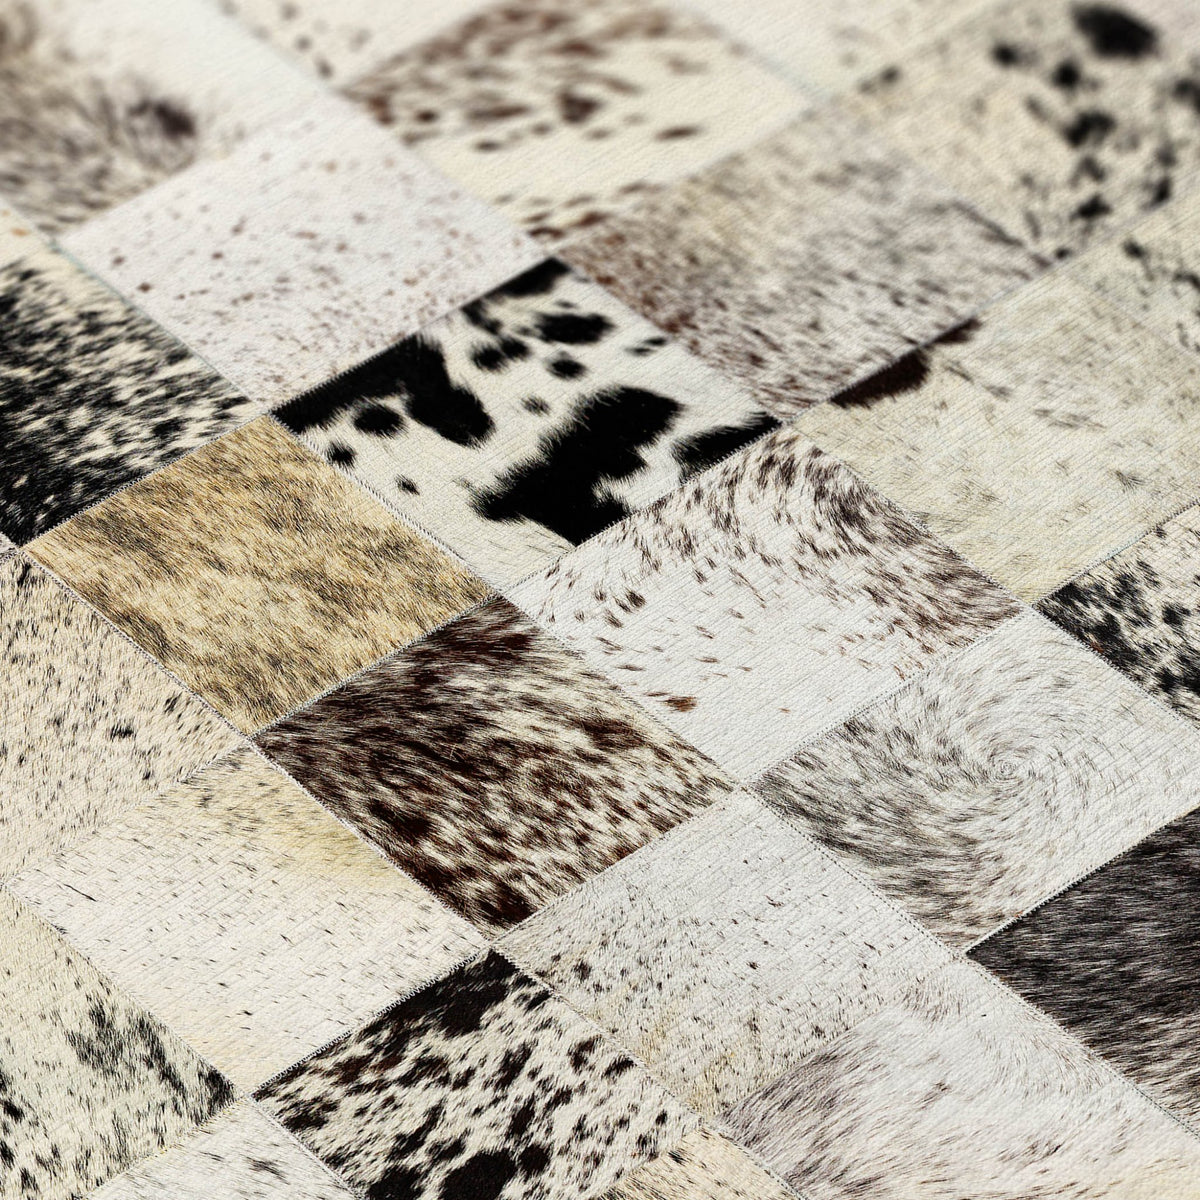 Stetson SS10 Marble Rug - Rug & Home